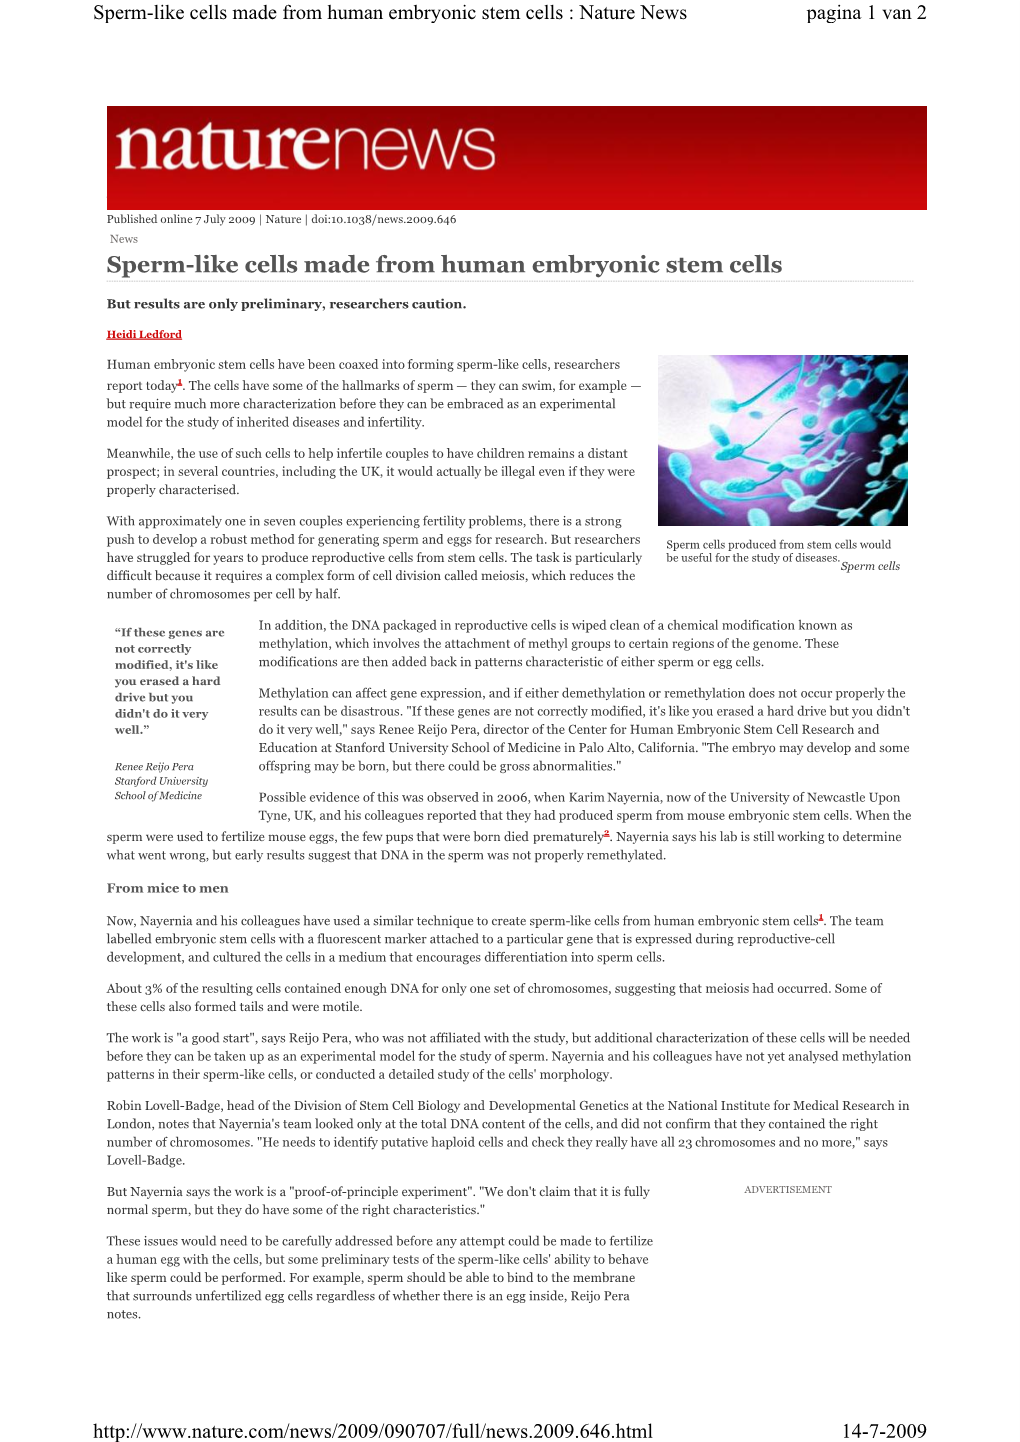 Sperm-Like Cells Made from Human Embryonic Stem Cells : Nature News Pagina 1 Van 2